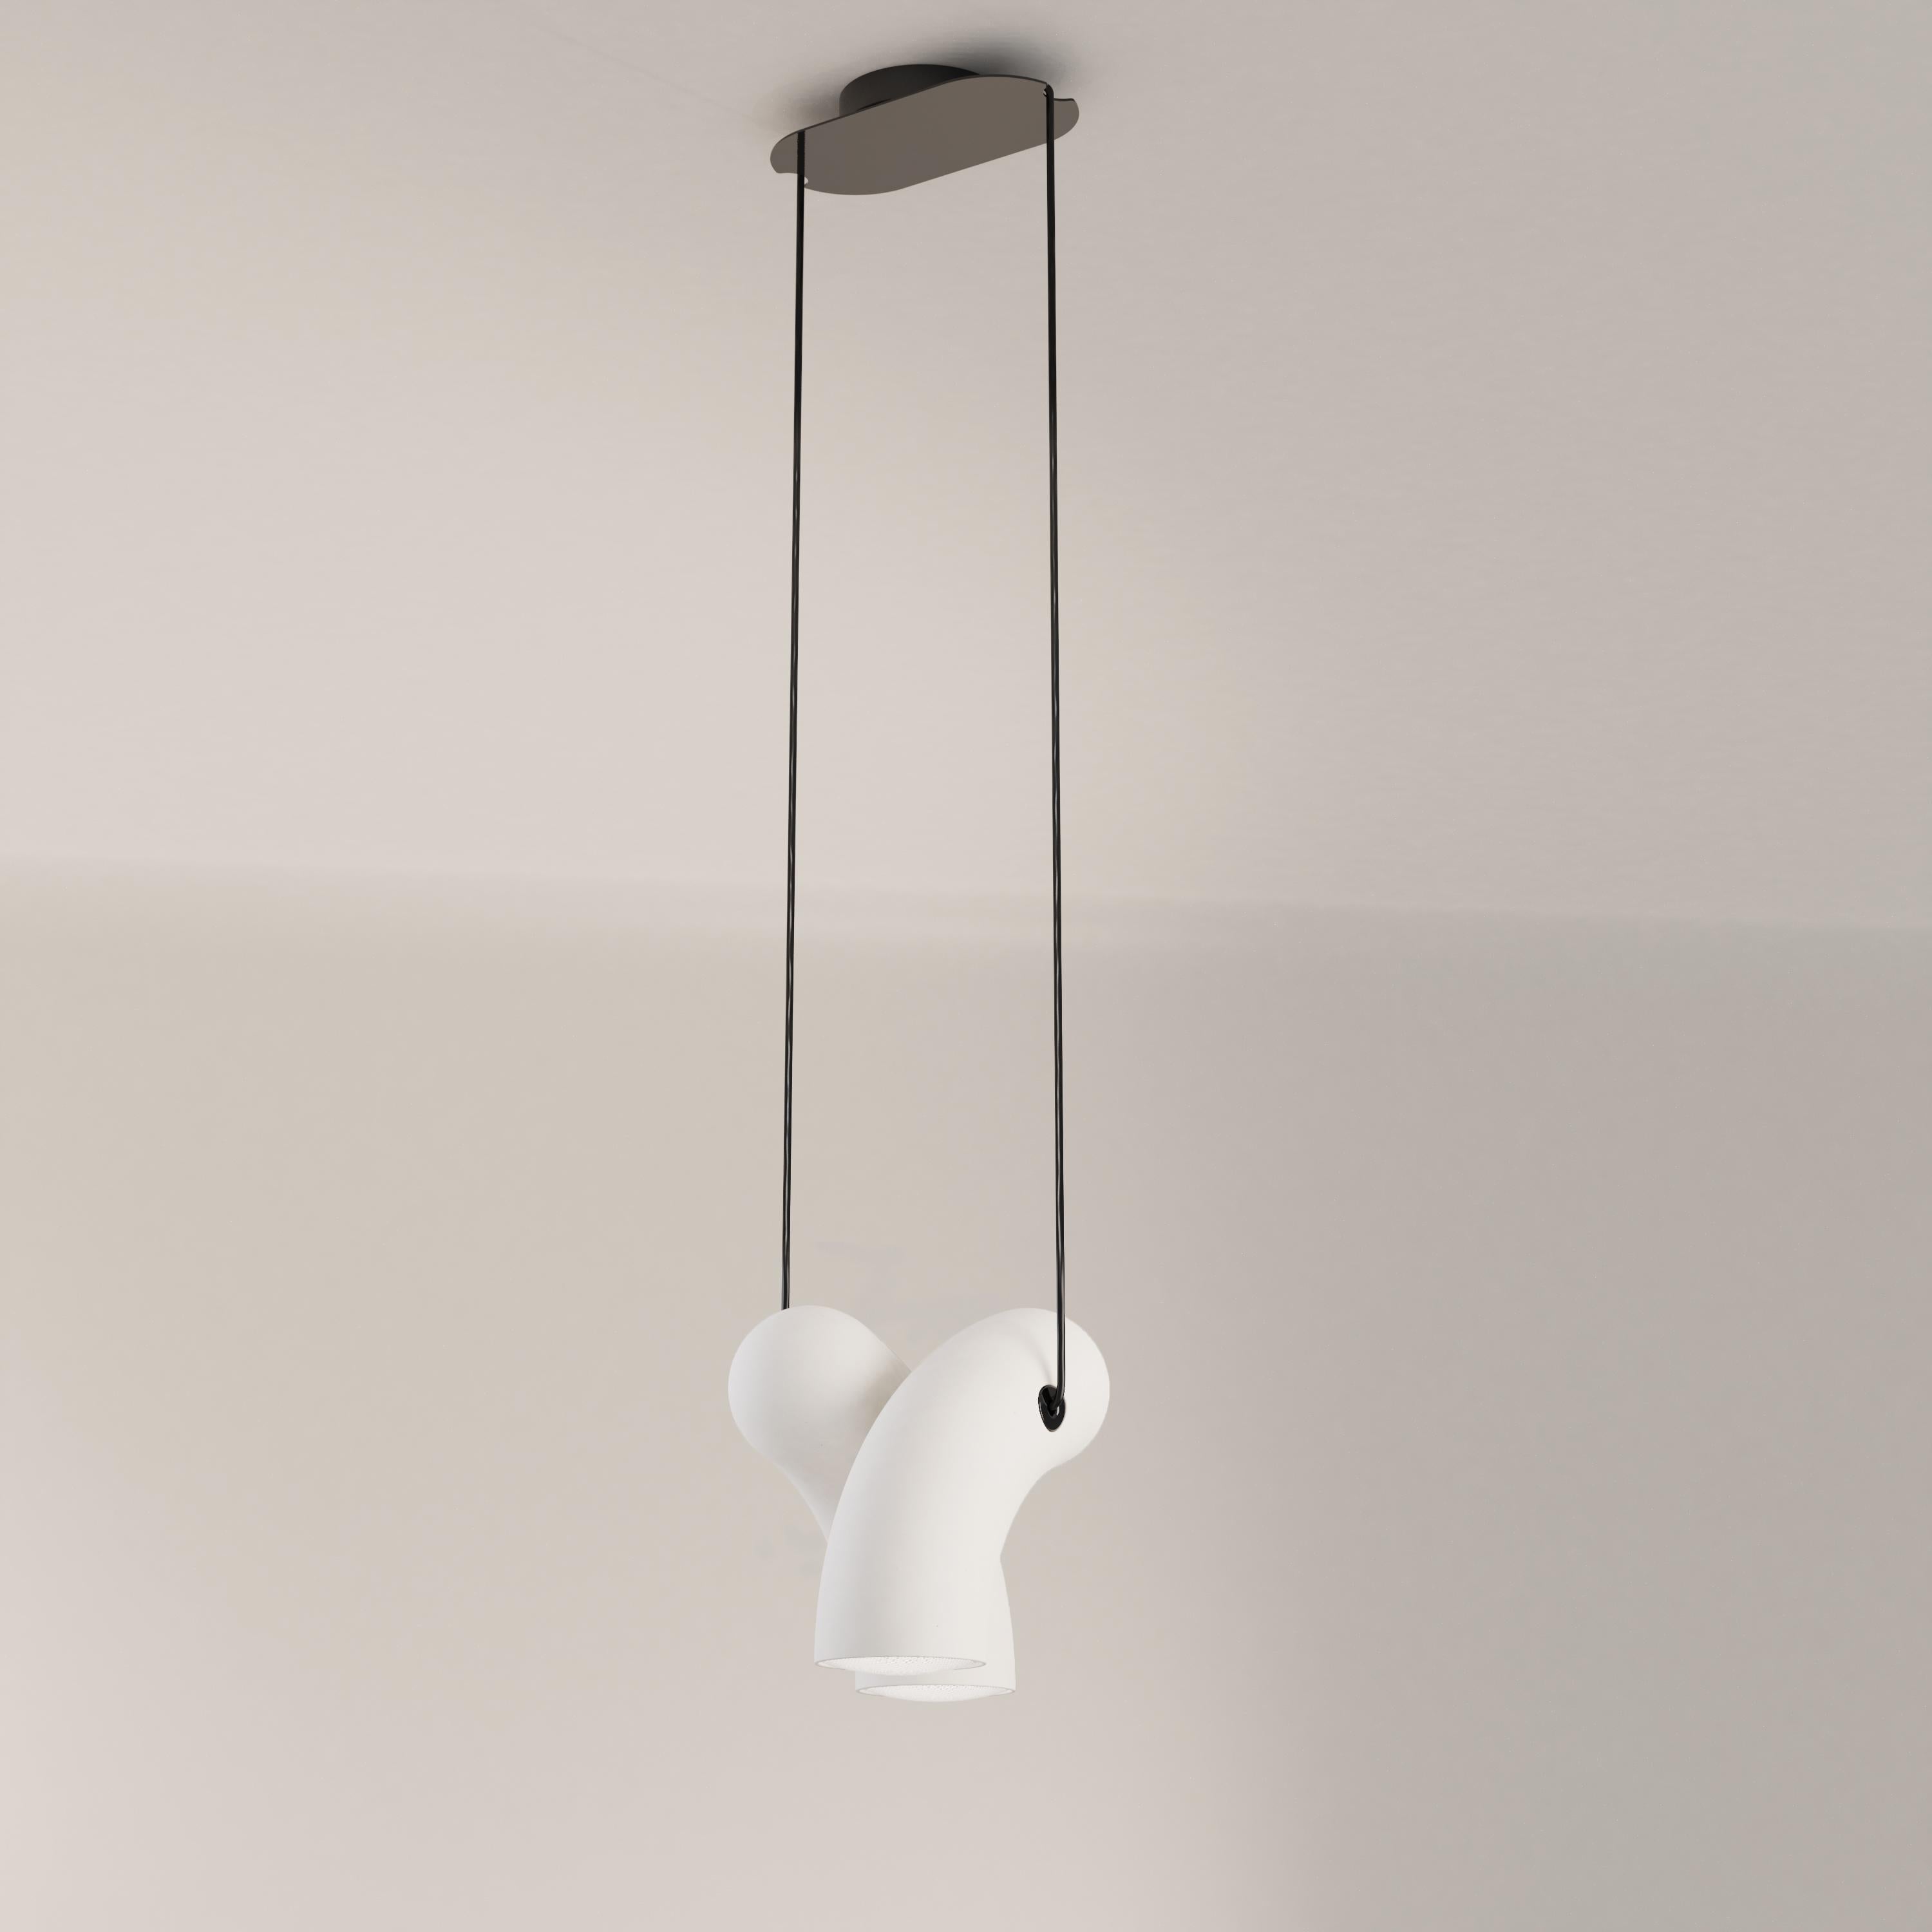 Porcelain Hyphen pendant lamp by Studio d'Armes
Dimensions: D 29 x W 22 x H 24 cm
Materials: Matte white porcelain.
Available in steel sandy black, steel chromatic black, natural porcelain and steel custom.

Derived from the ancient Greek ?f’